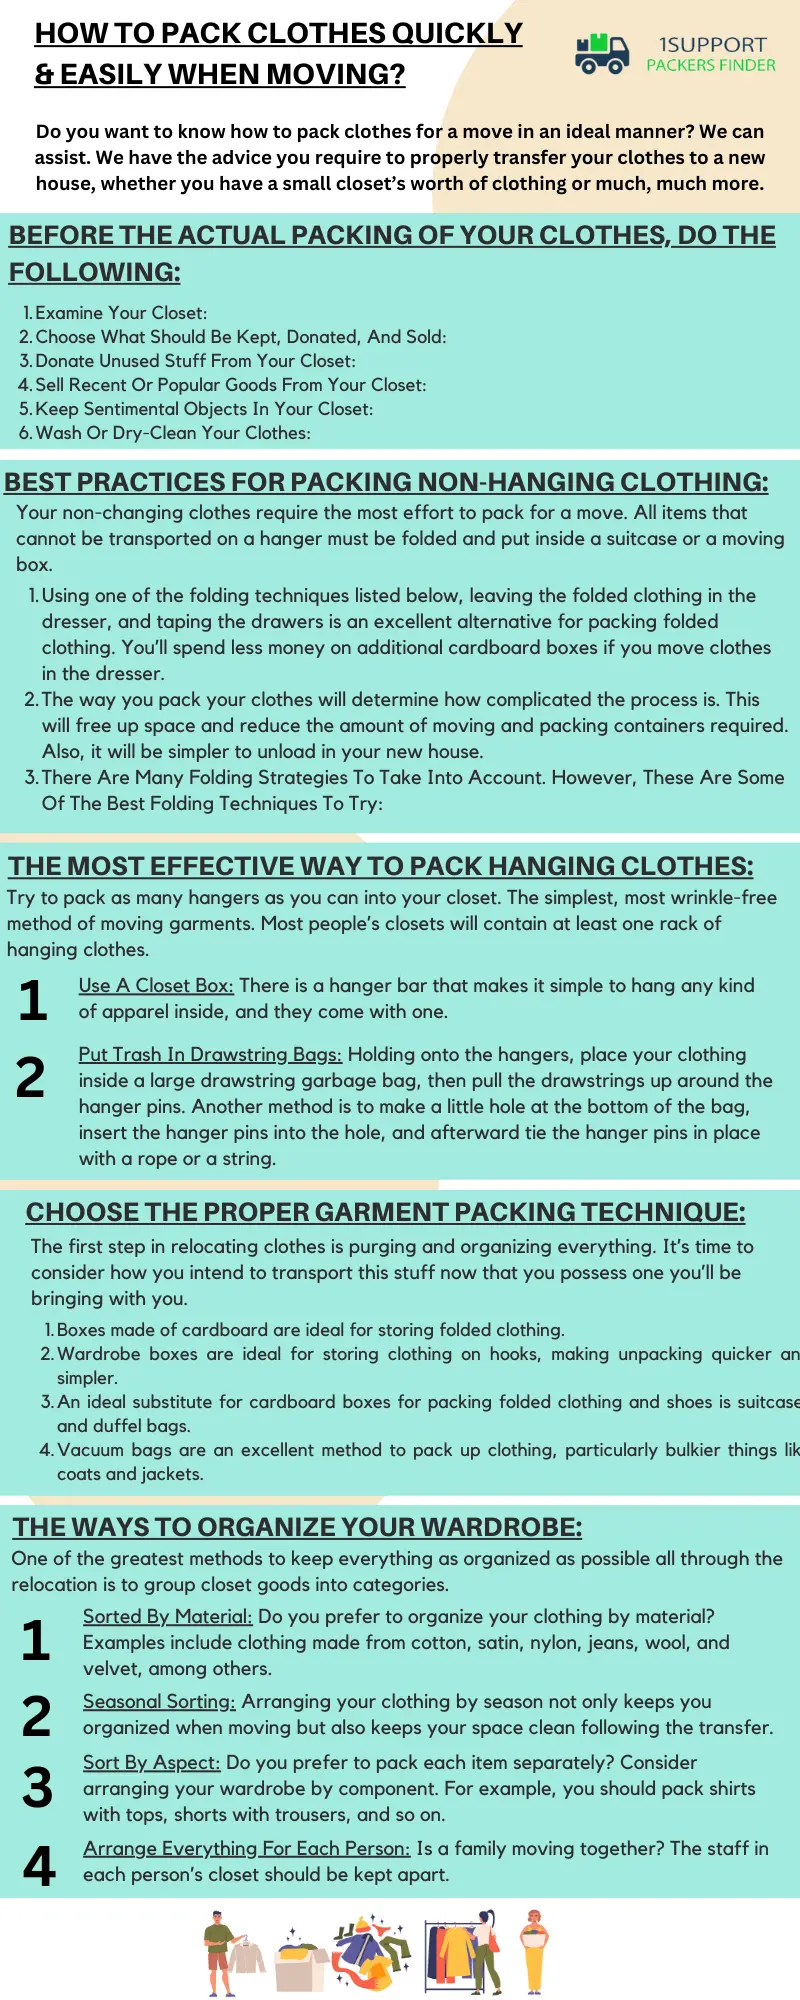 How To Pack Clothes When Moving Informational Infographic